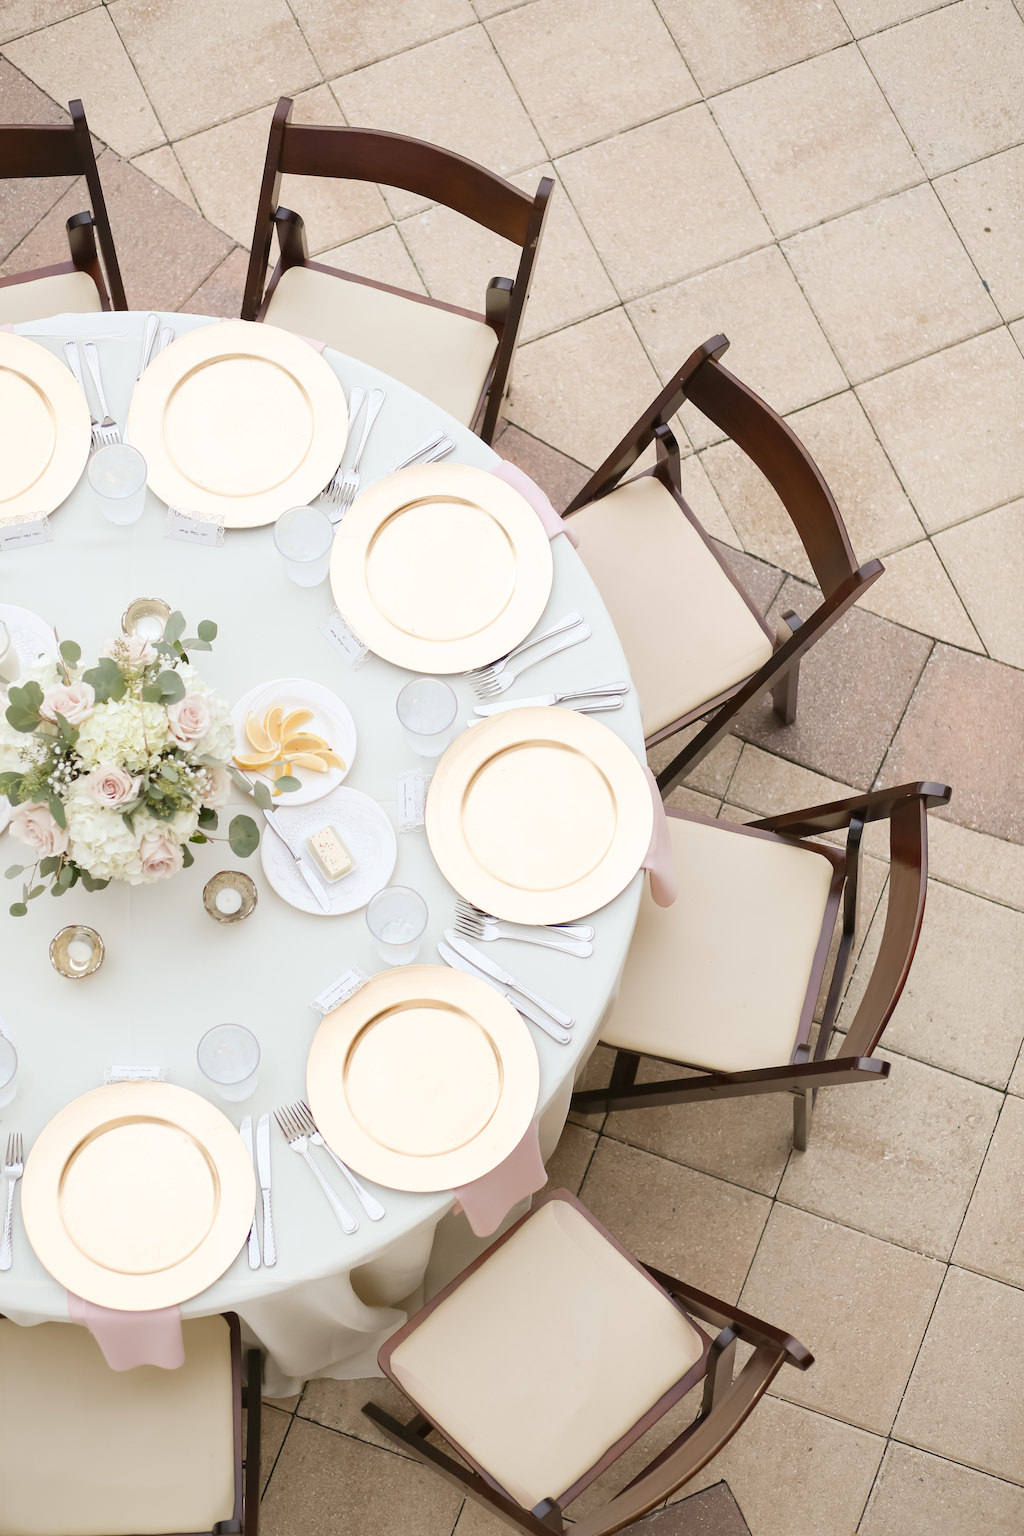 Outdoor Rustic Nautical Wedding Reception ROund Table Decore with Ivory Rose and Greenery Centerpiece, Blue Tablecloth and Blush Pink LInens, and Gold Chargers and Brown Wooden Chairs